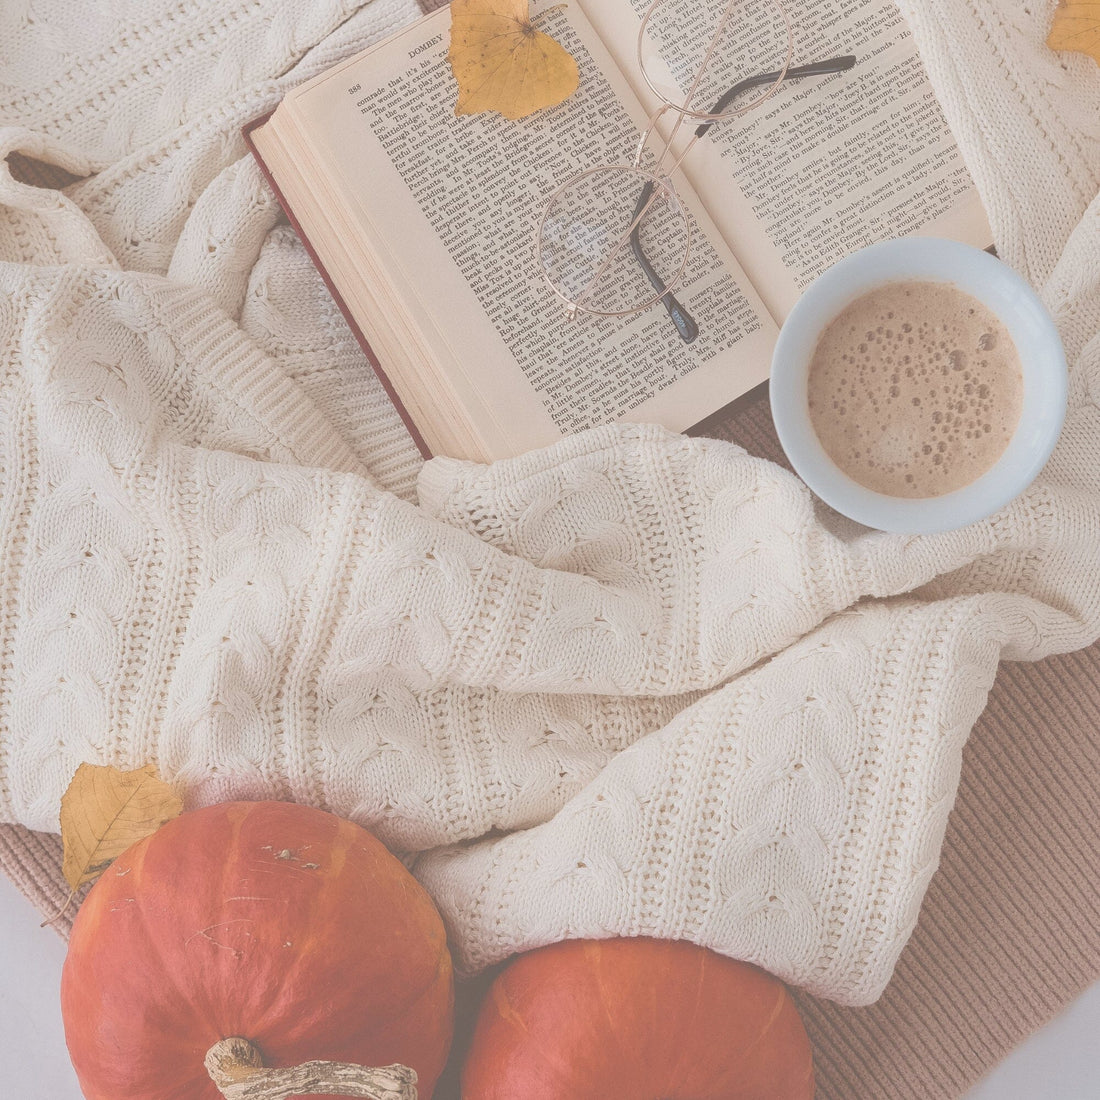 Fall's Finest: Home Decorating Inspiration for Autumn